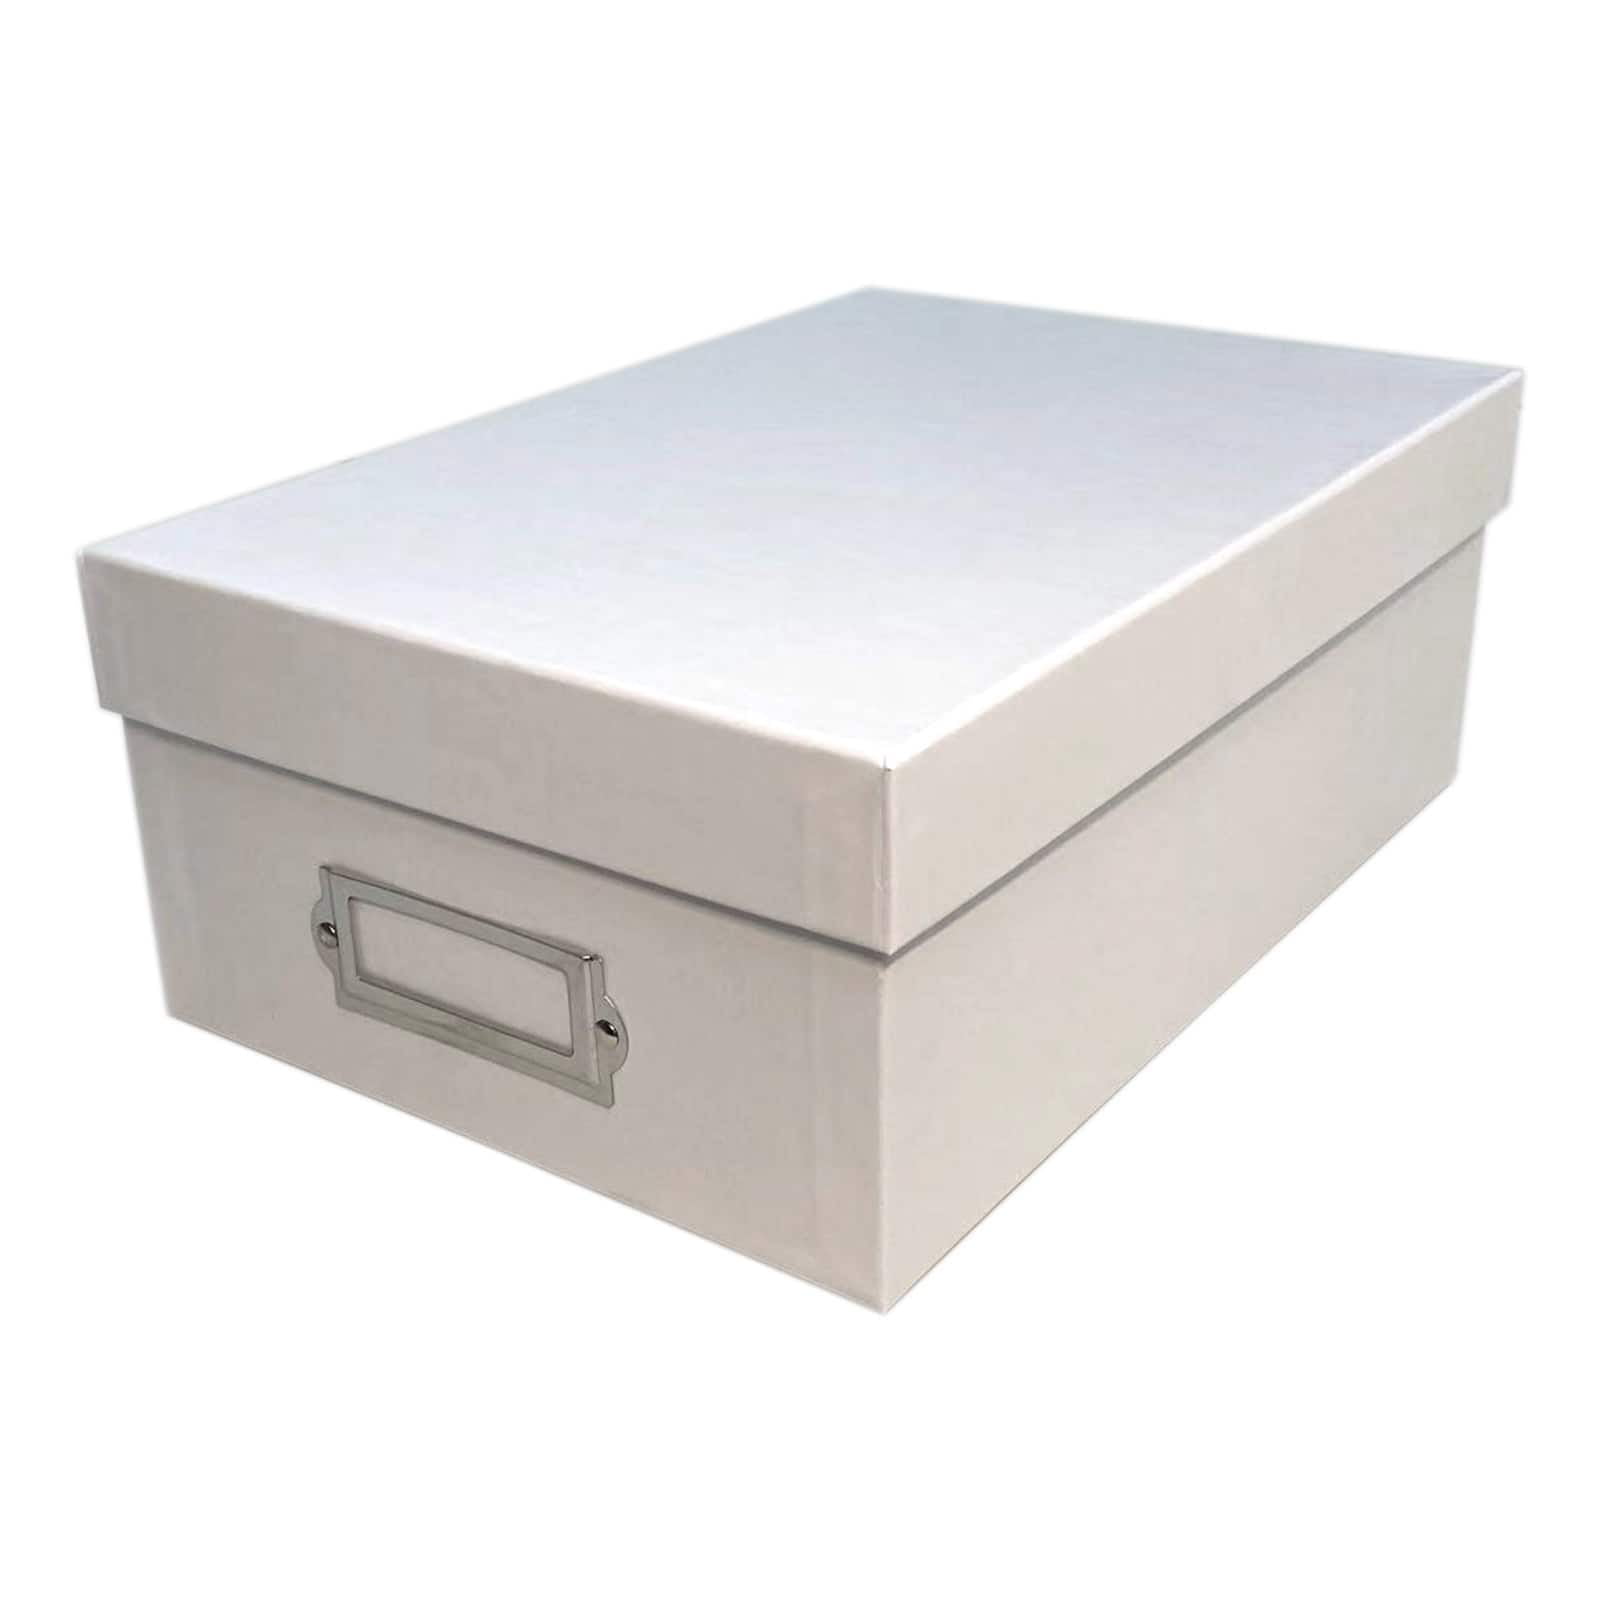 3-Layer Craft Storage Box, Coral - Everything Mary